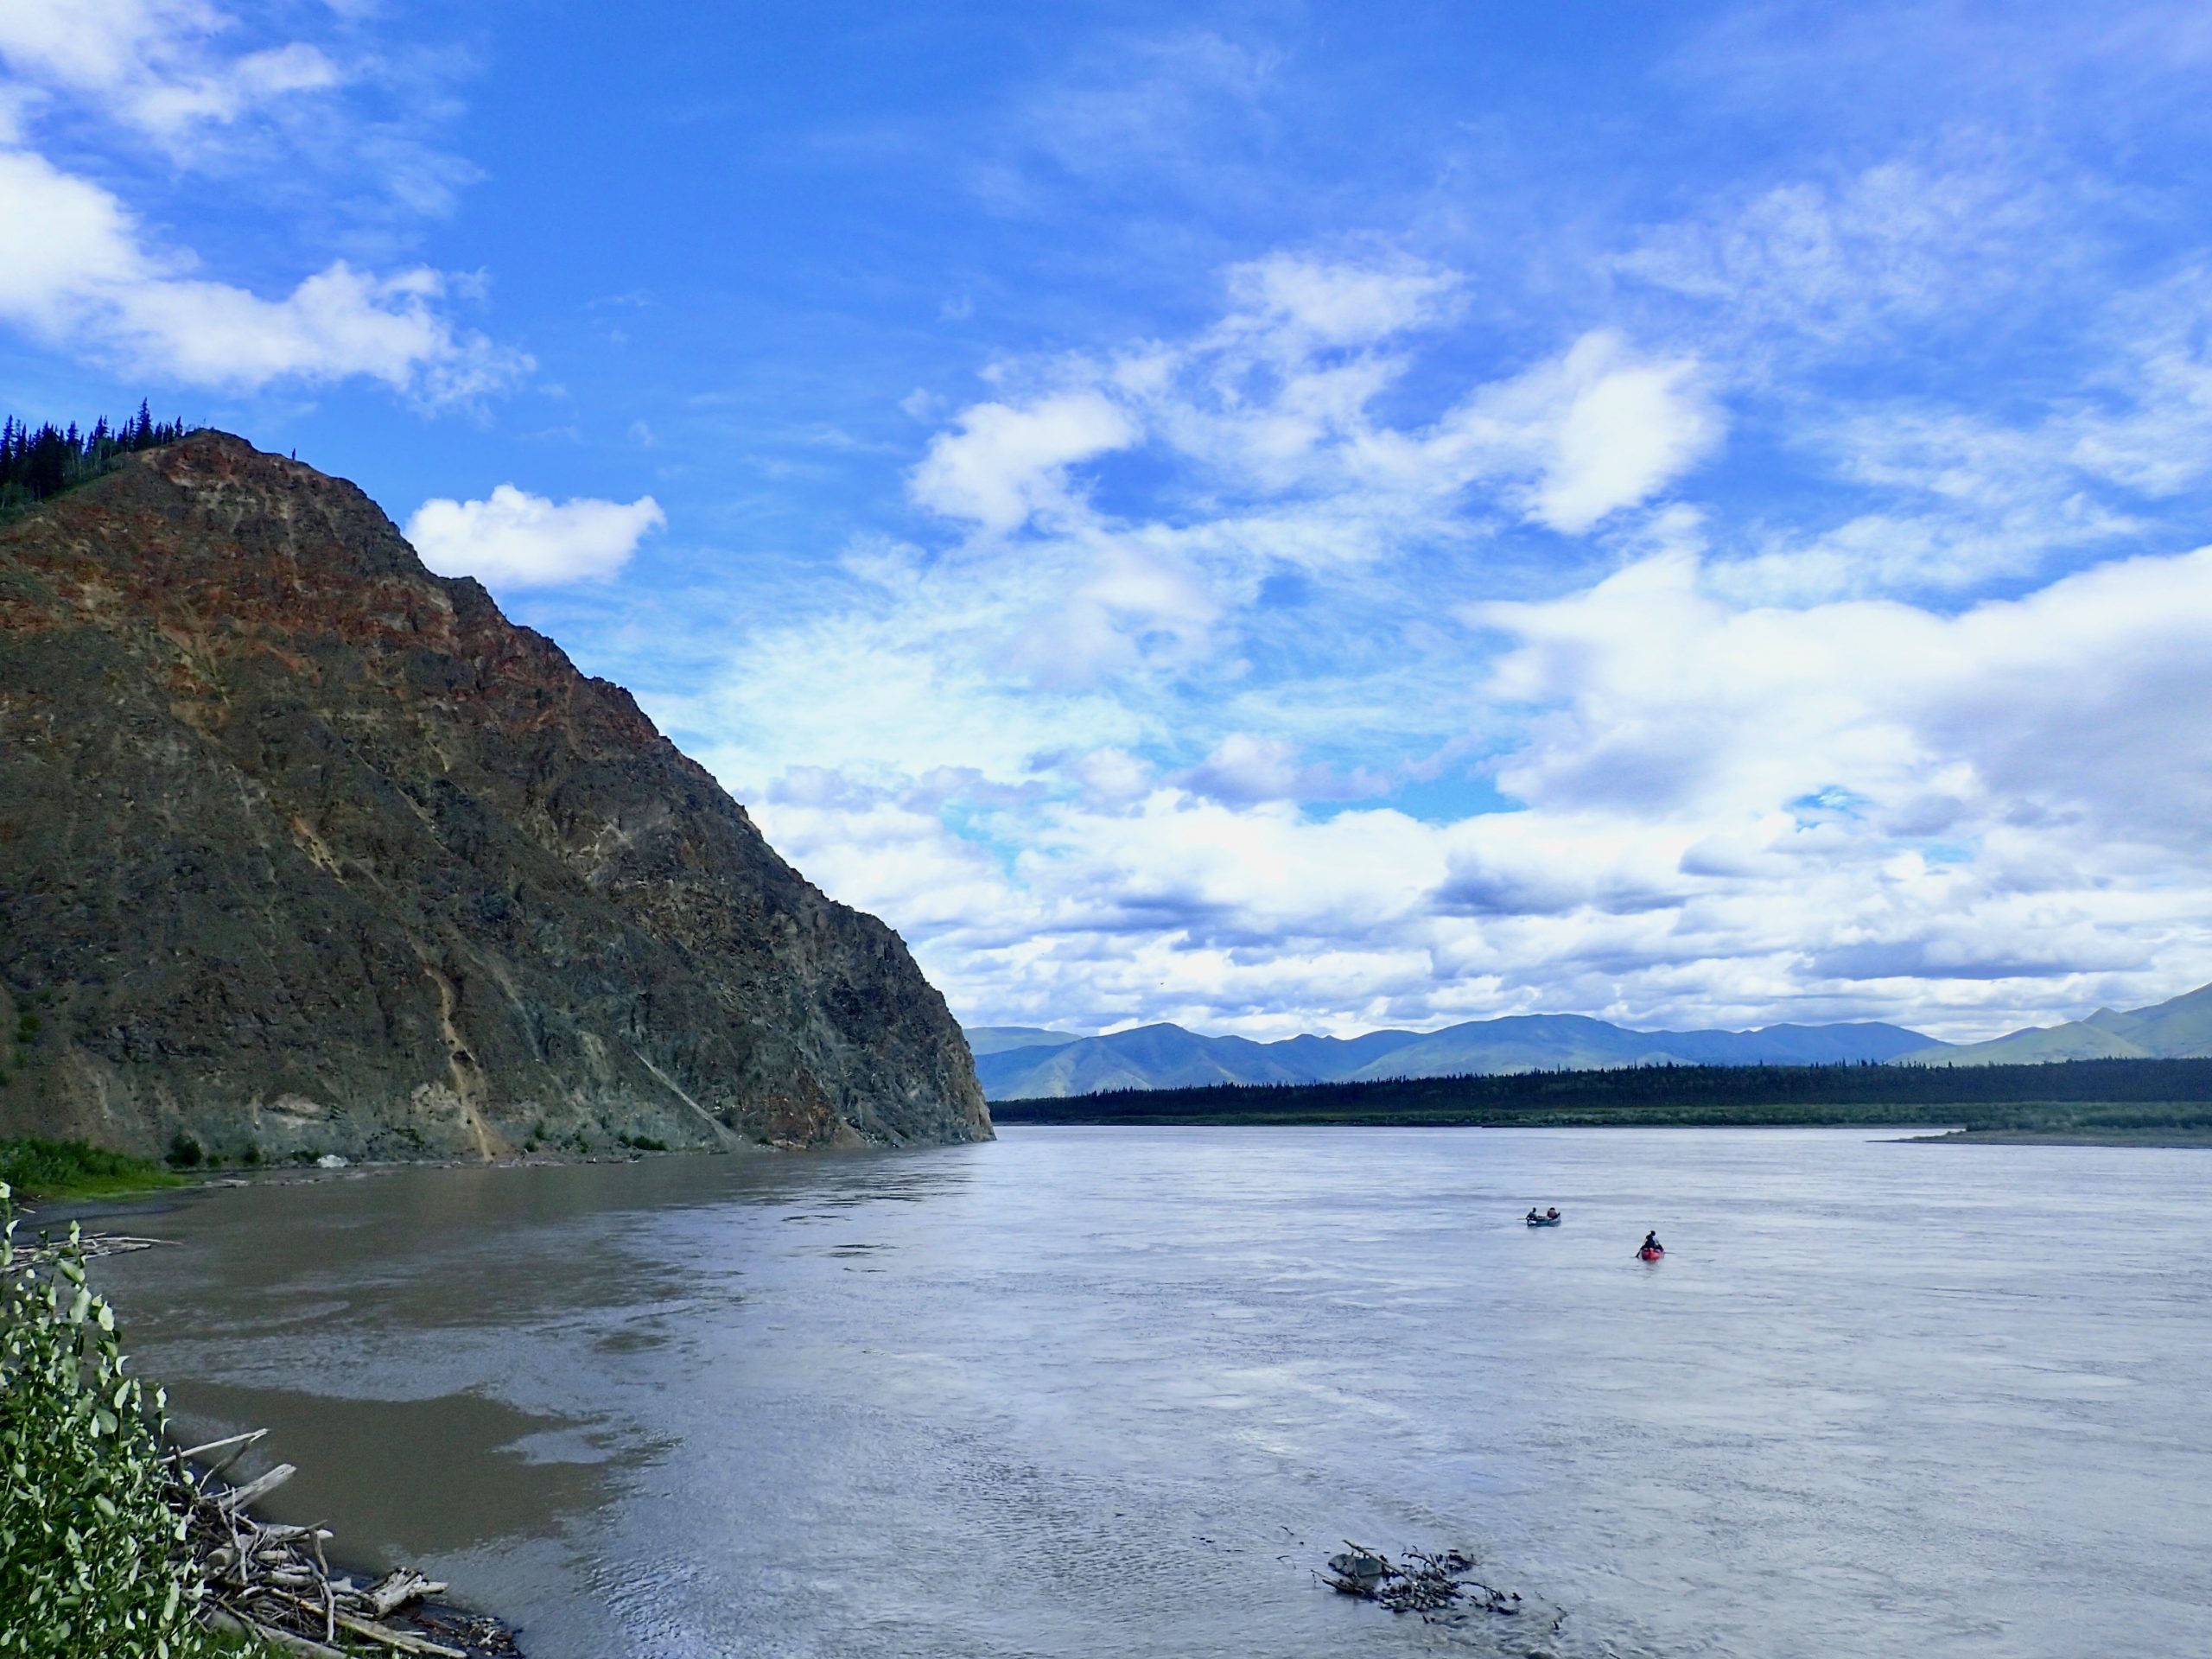 Photo by Ned Rozell. Canoeists take to the Yukon River as it flows past the bluff just downstream from Eagle, Alaska, in summer 2019.